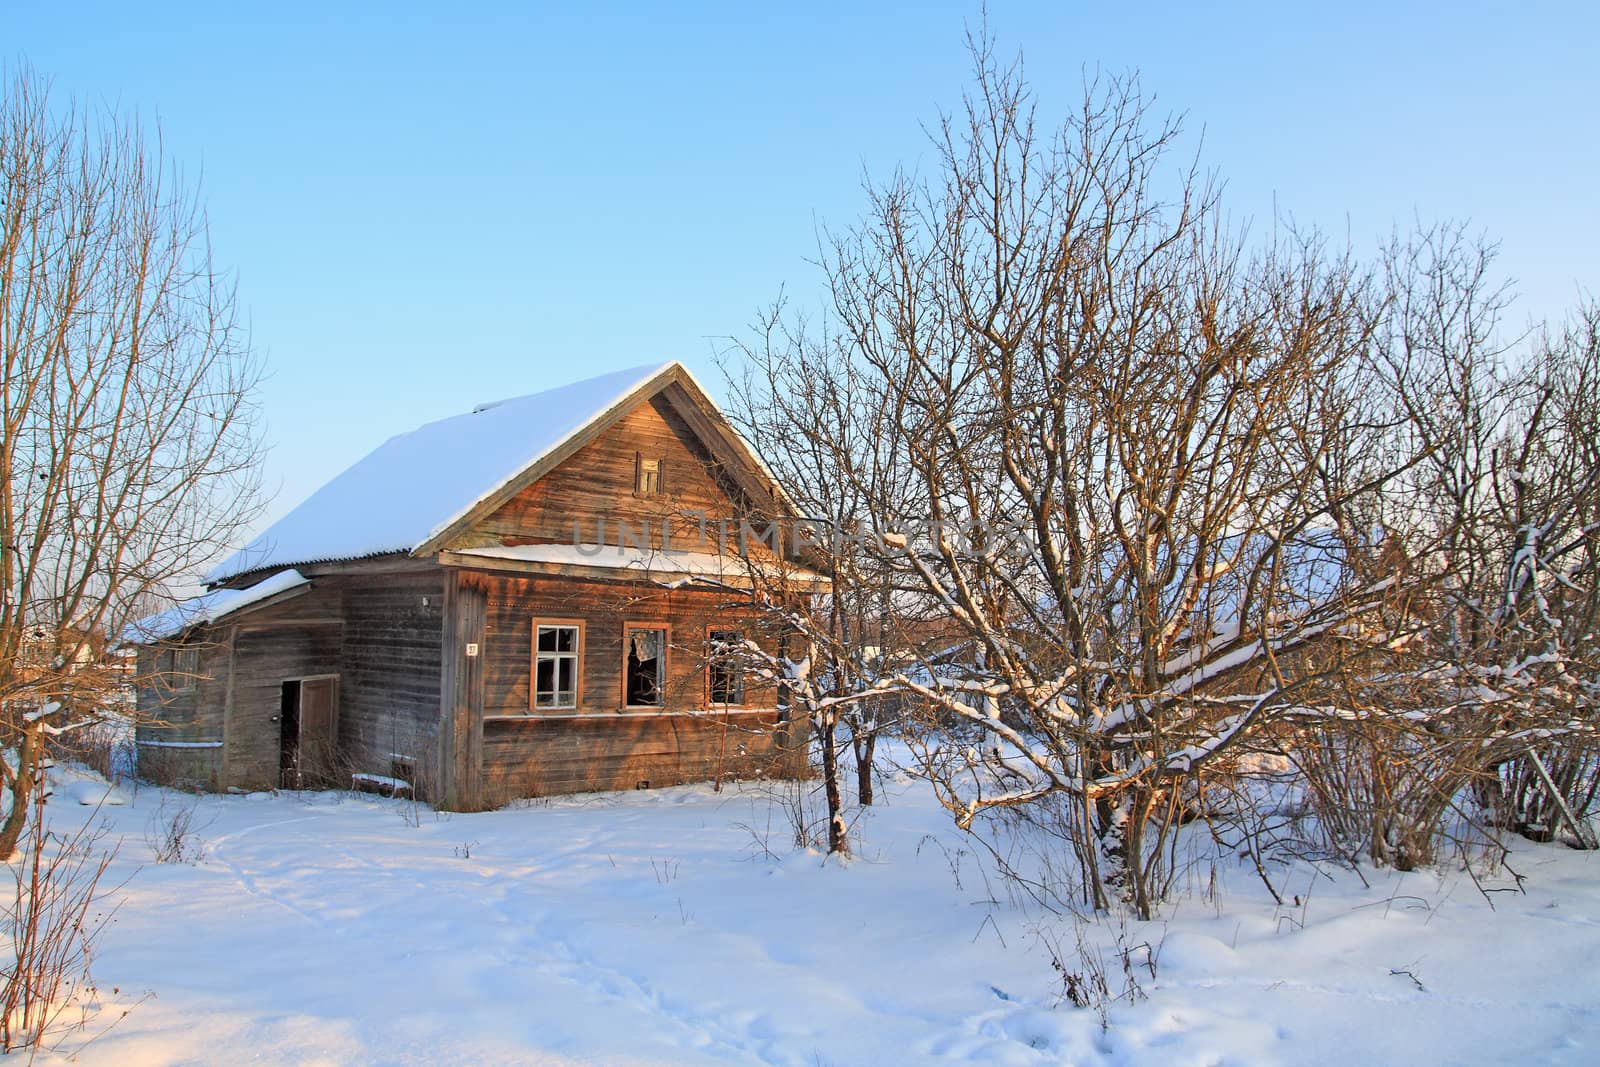 old rural house amongst snow by basel101658